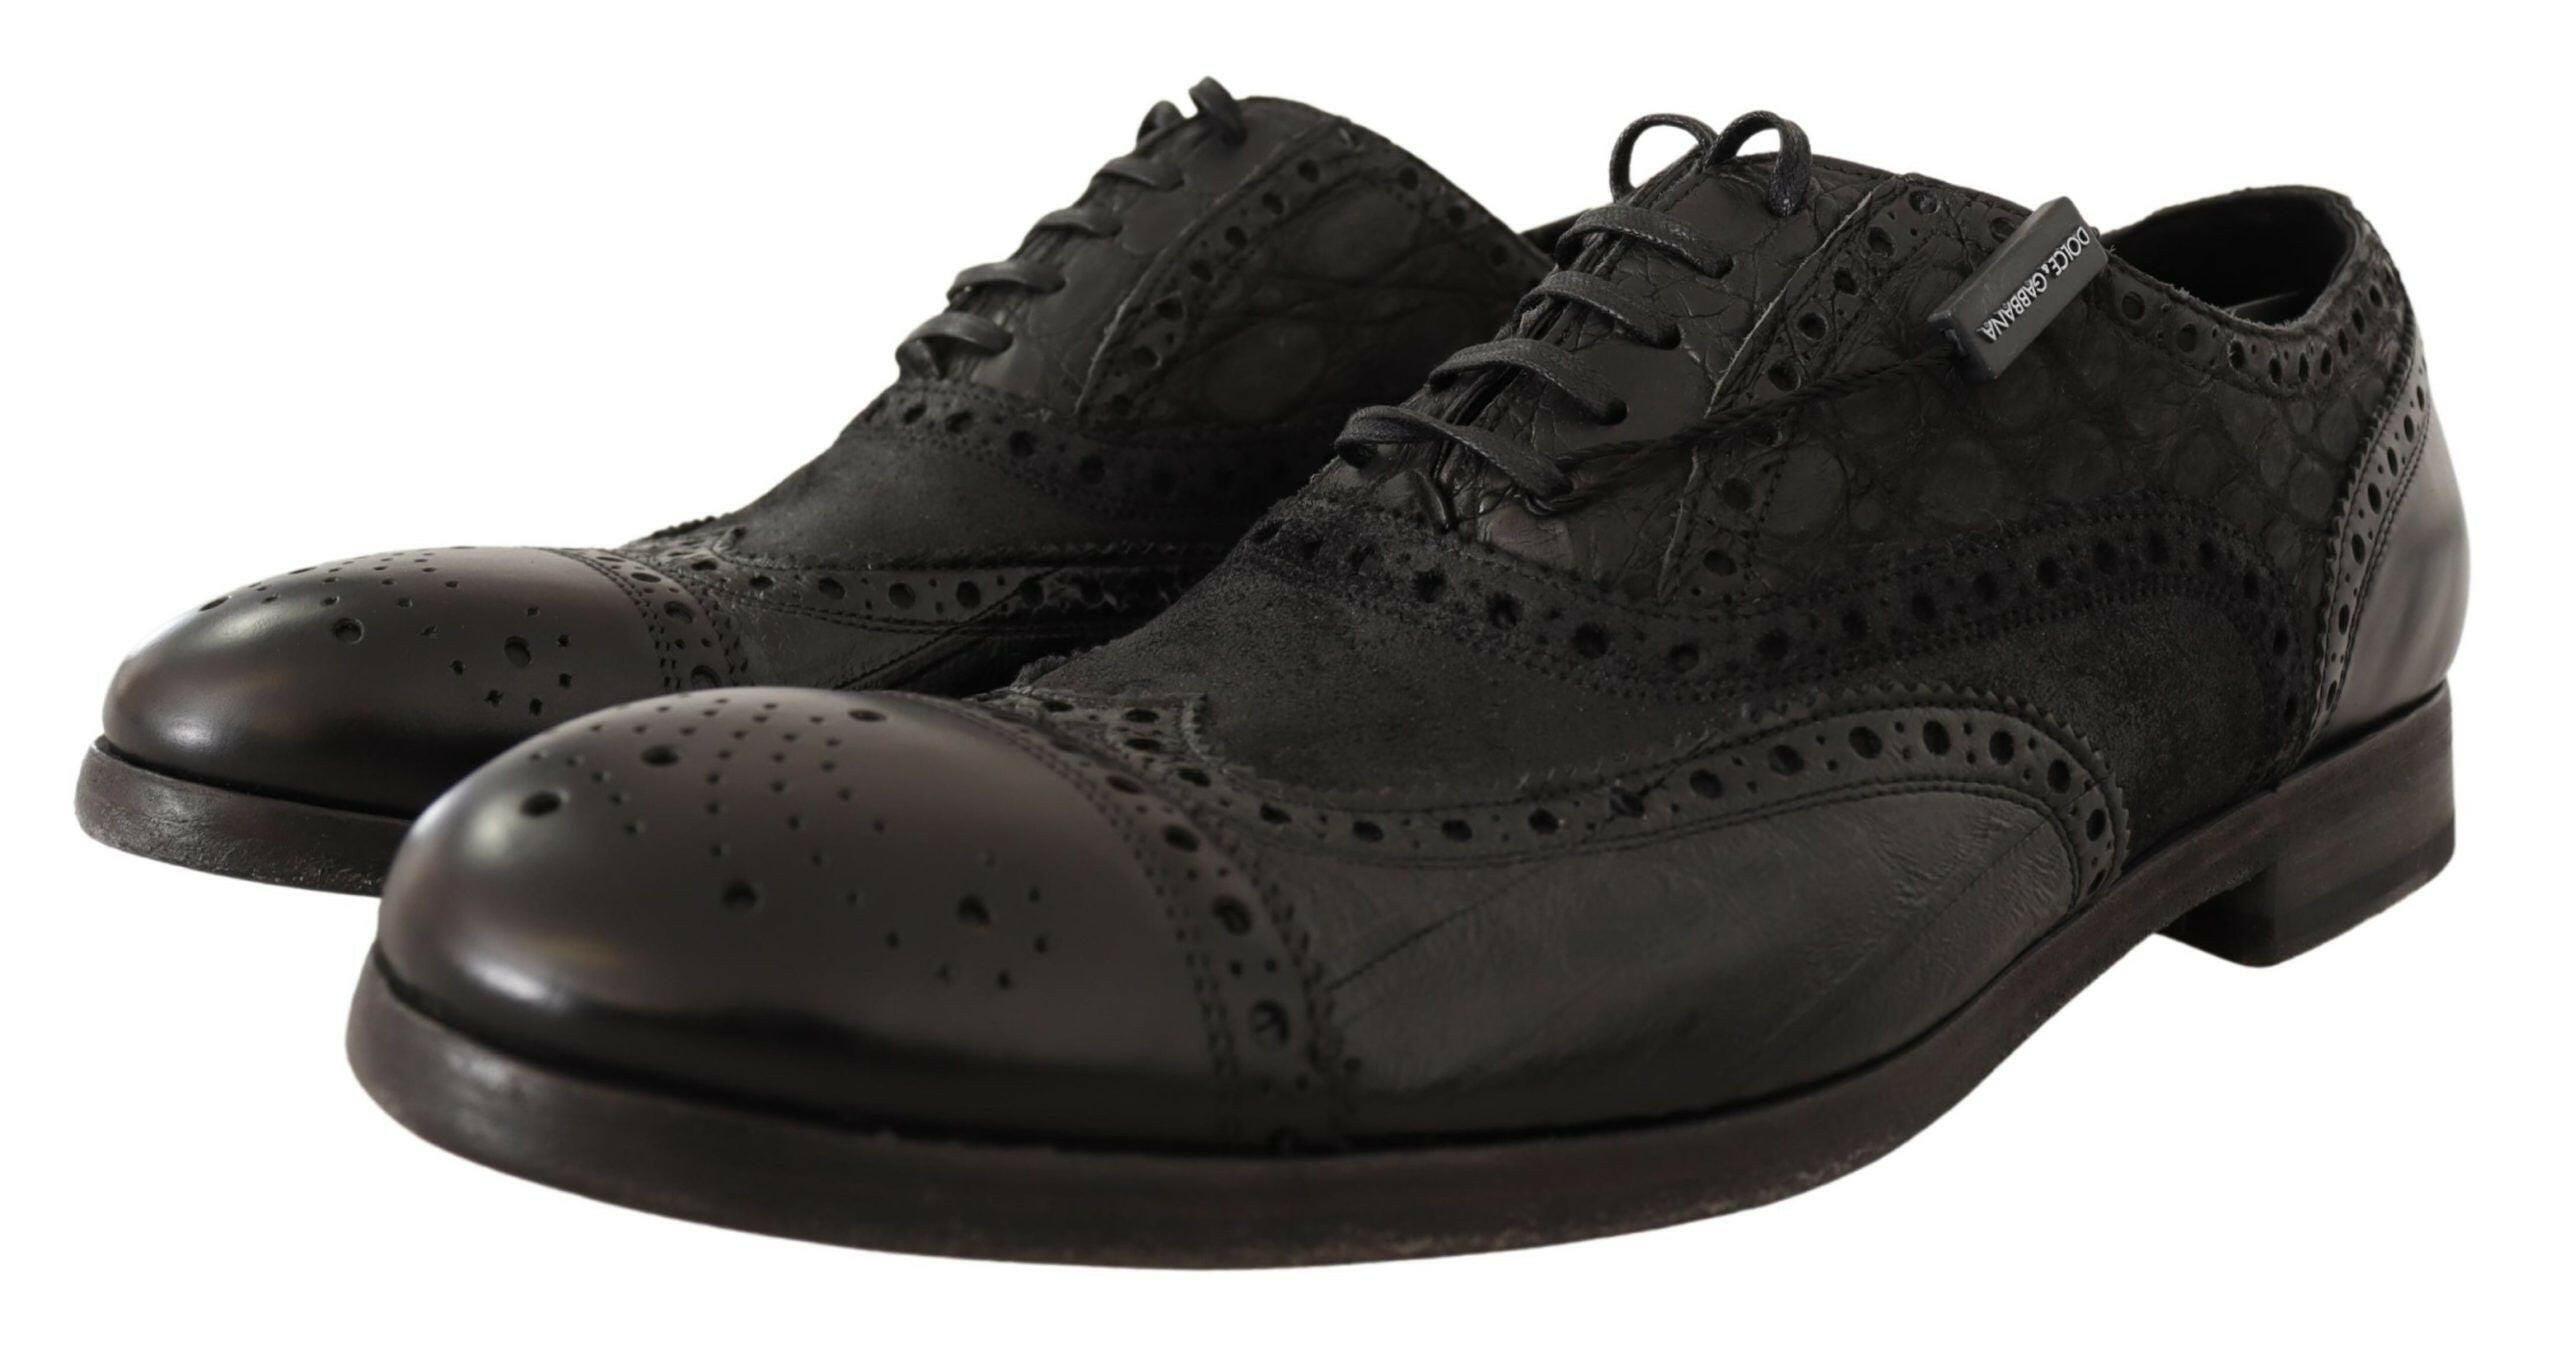 Dolce & Gabbana Black Leather Brogue Wing Tip Men Formal Shoes - GENUINE AUTHENTIC BRAND LLC  